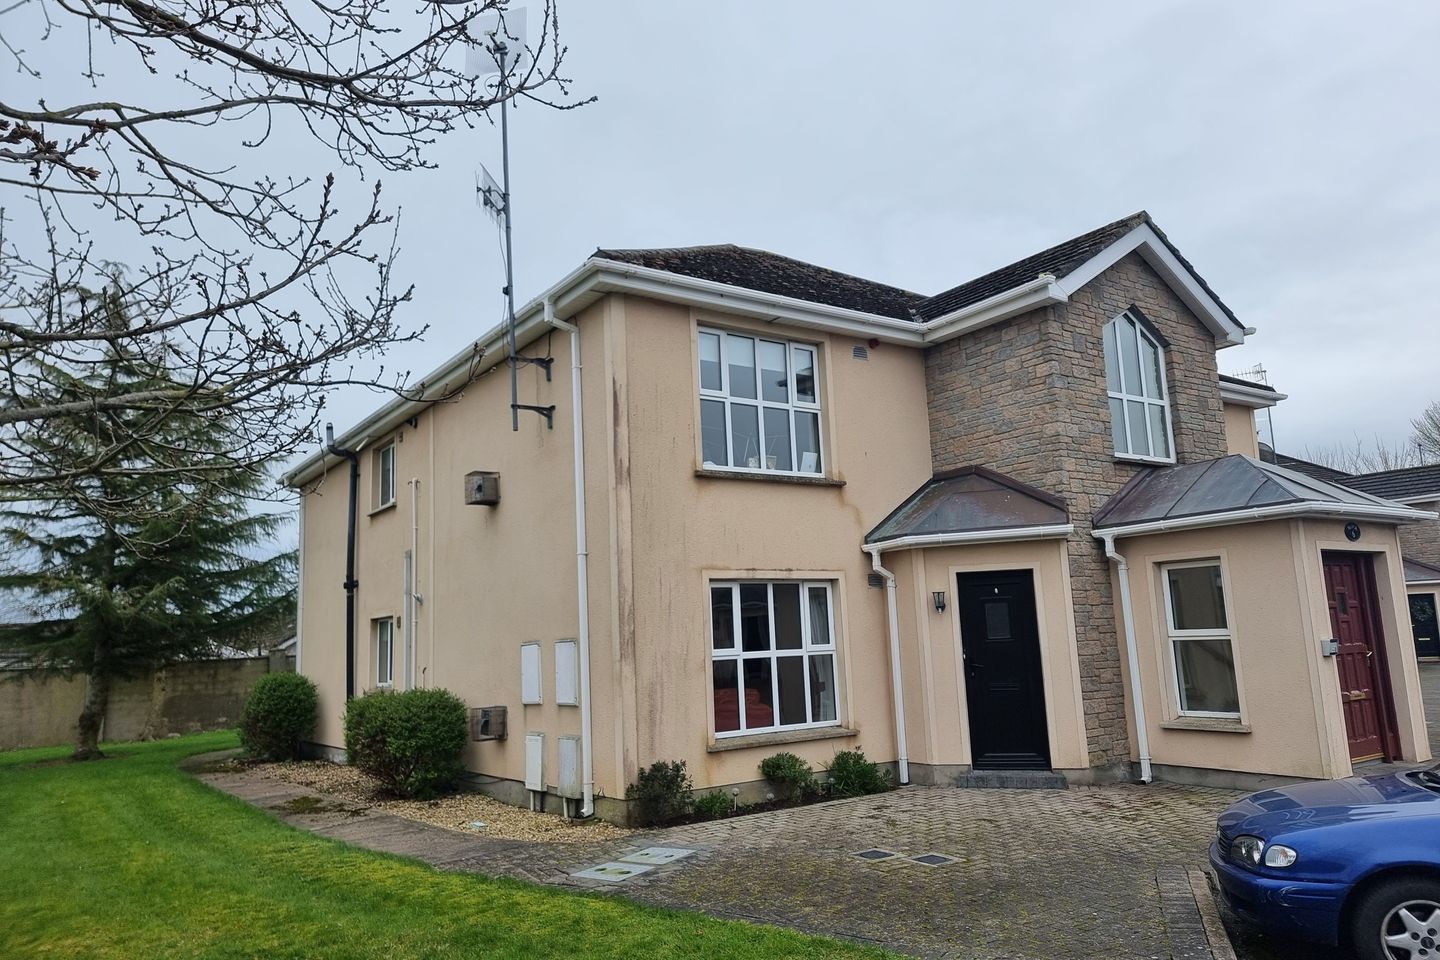 Apartment 1, Block 6, Woodford, Drogheda, Co. Louth, A92A326